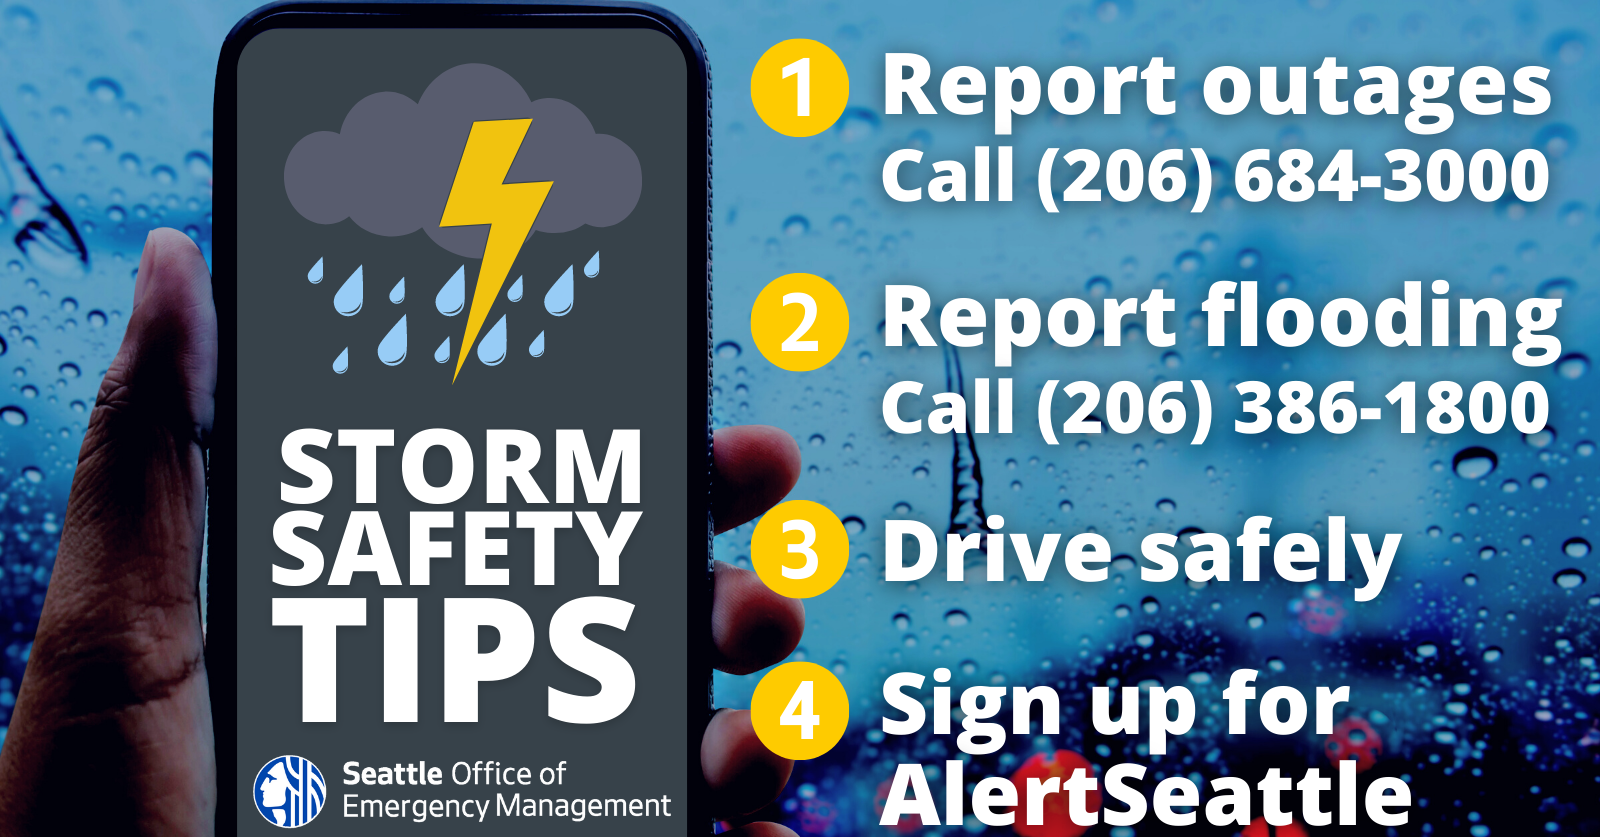 Storm Safety Tips: Report outages, 206-684-3000; Report flooding, 206-386-1800; Drive safely; Sign up for AlertSeattle